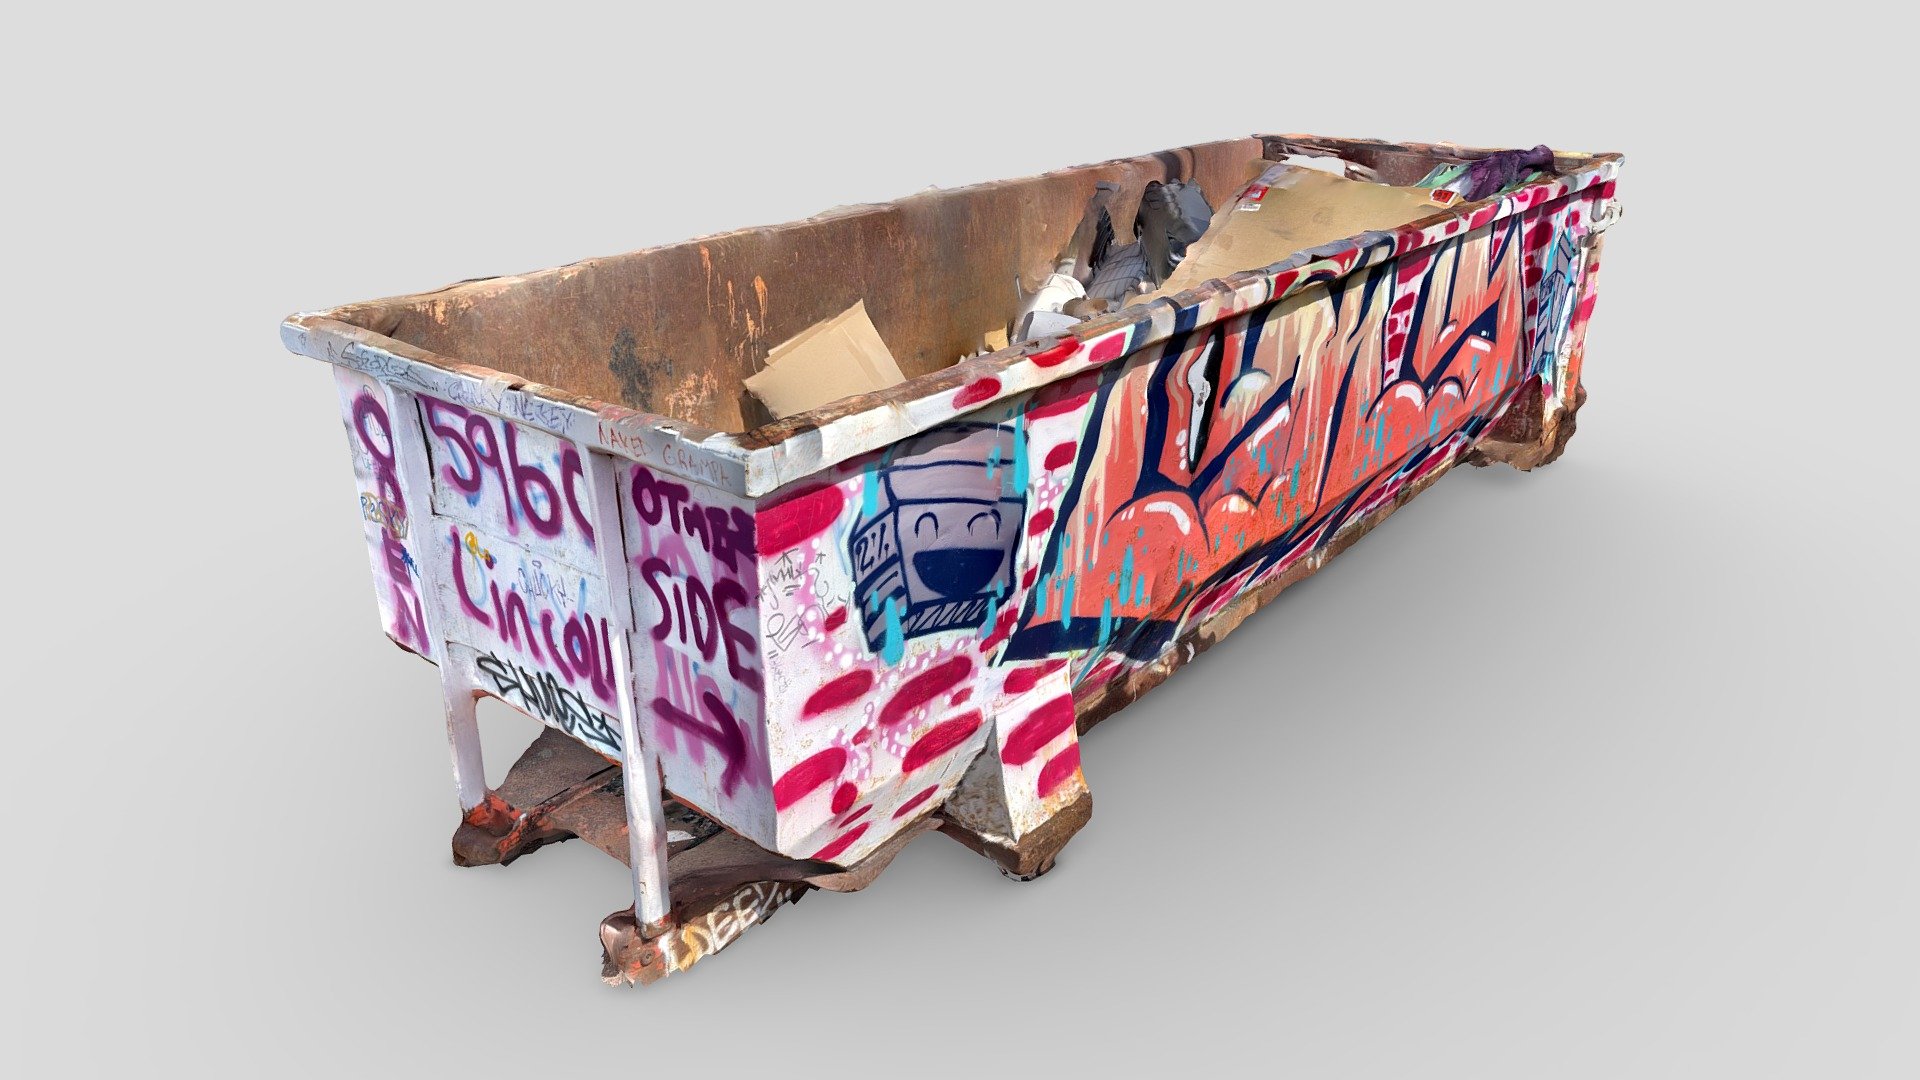 Captured with iPhone Lidar + @Scaniverse


1scanaday - Day 73: Graffiti Dumpster - Download Free 3D model by alexdelker 3d model